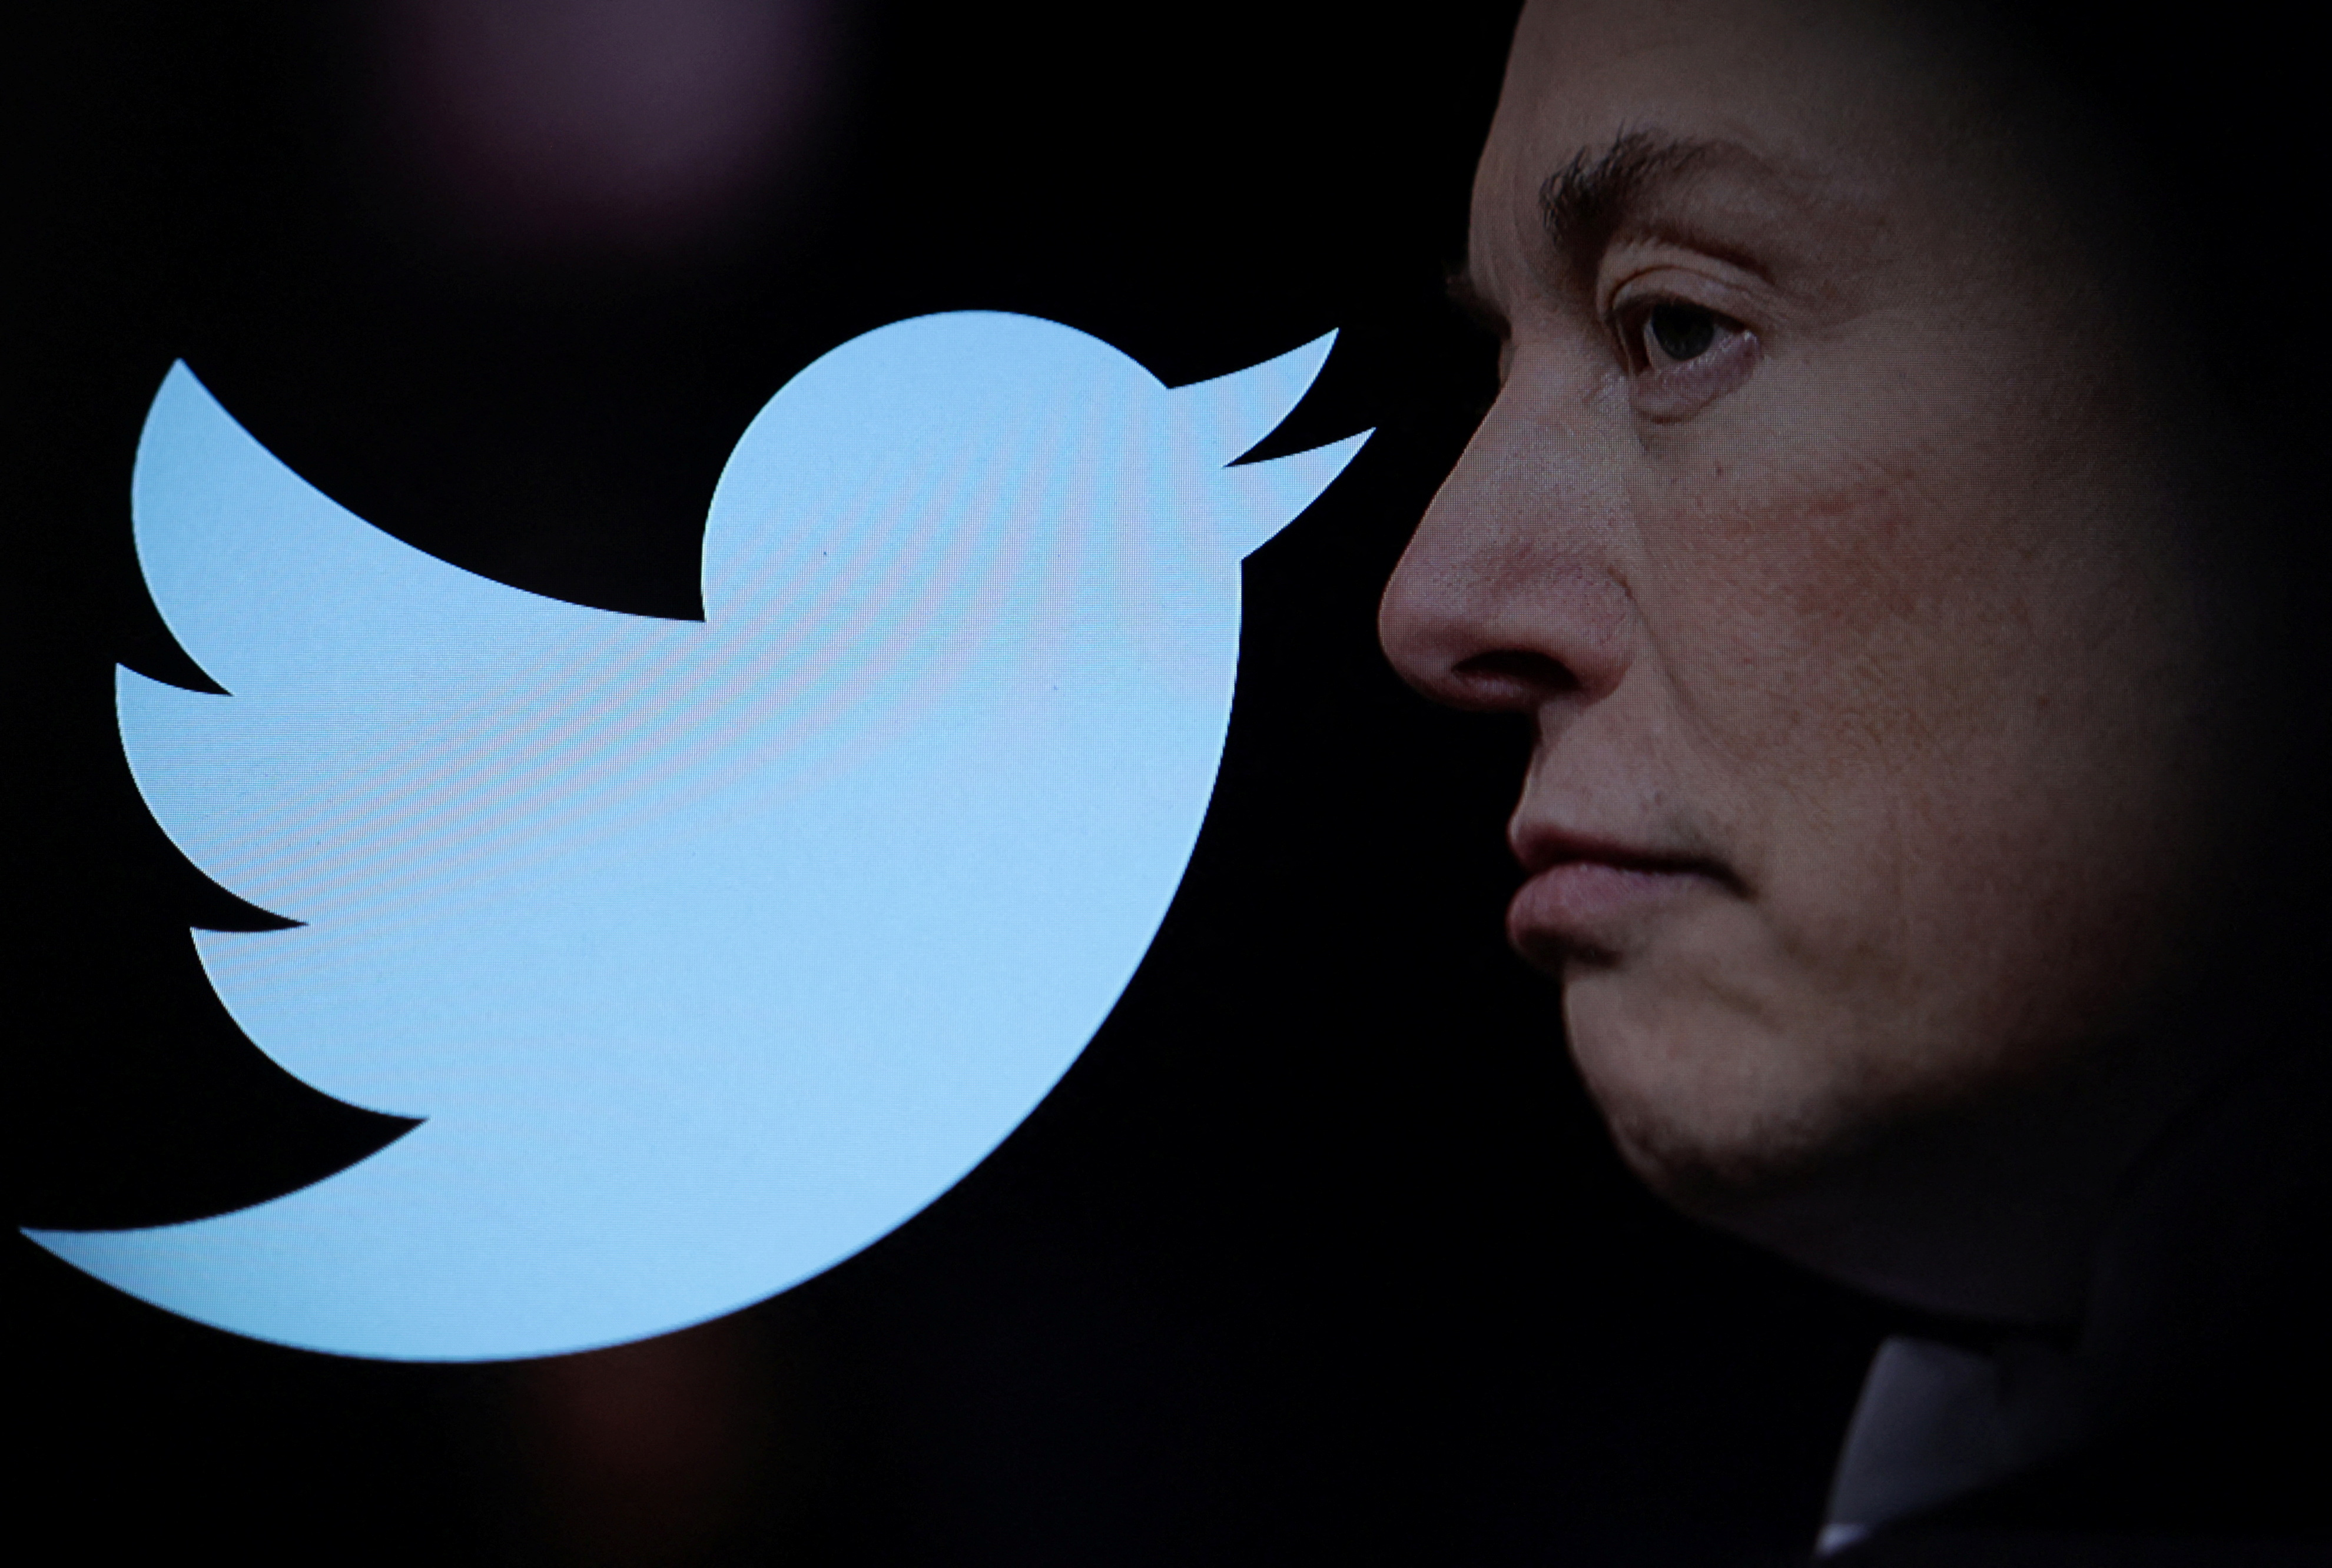 Picture shows Elon Musk photo and Twitter logo